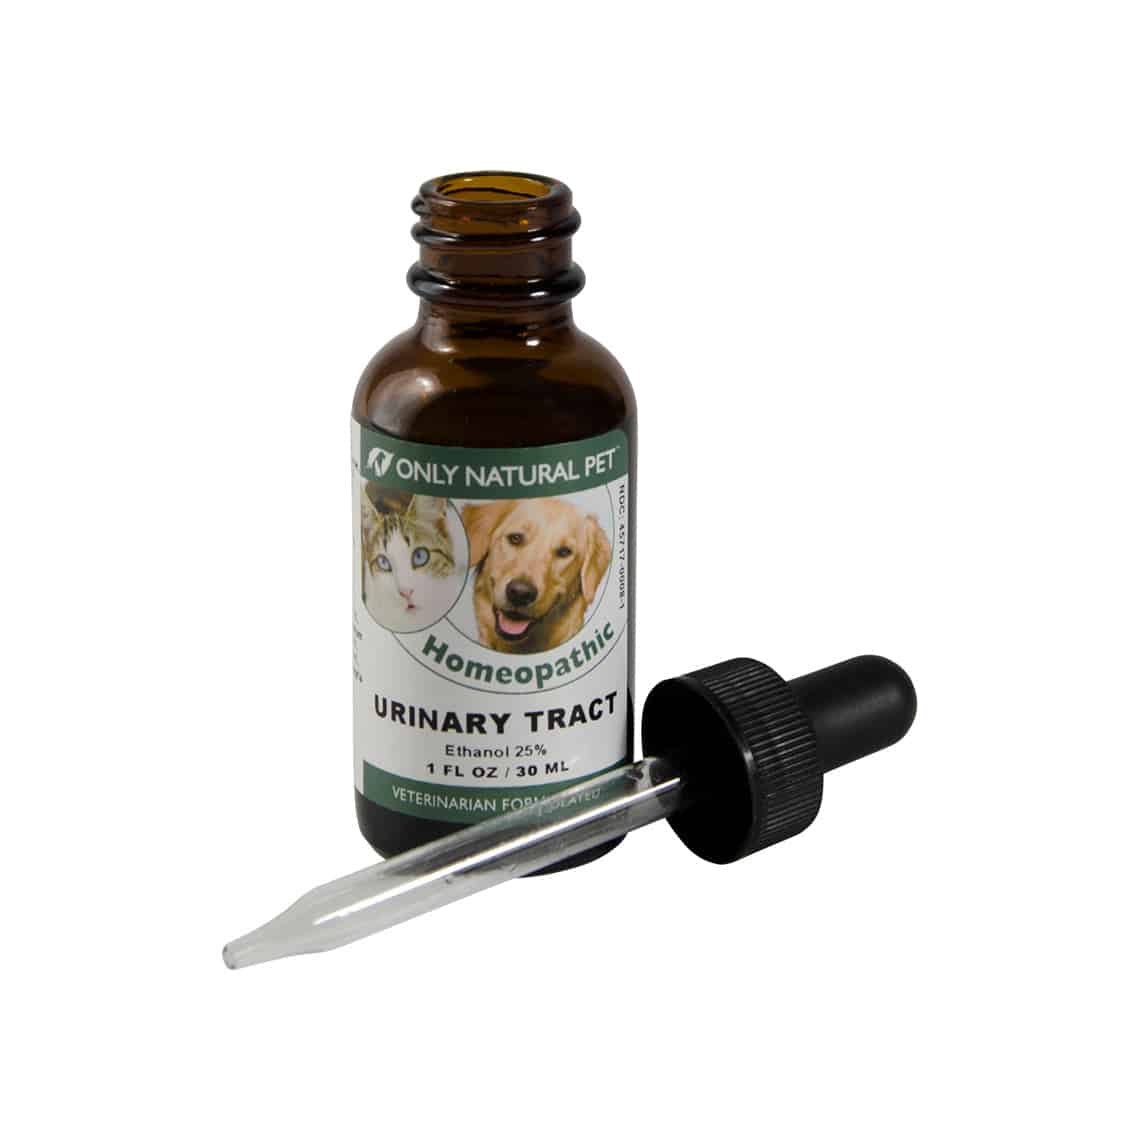 Only Natural Pet Urinary Tract Homeopathic Remedy